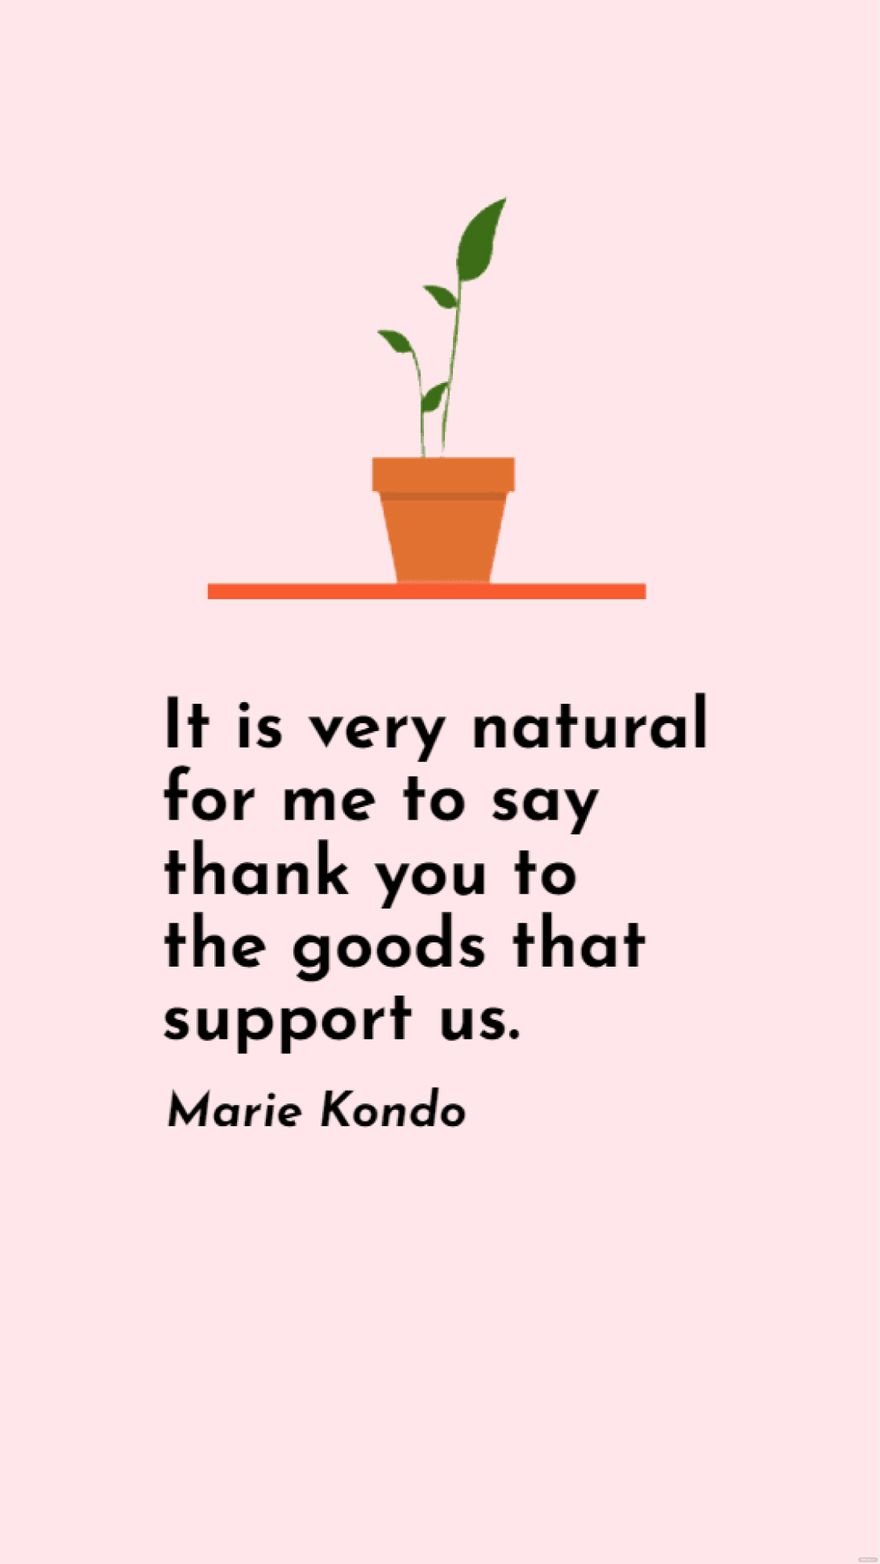 Marie Kondo - It is very natural for me to say thank you to the goods that support us.